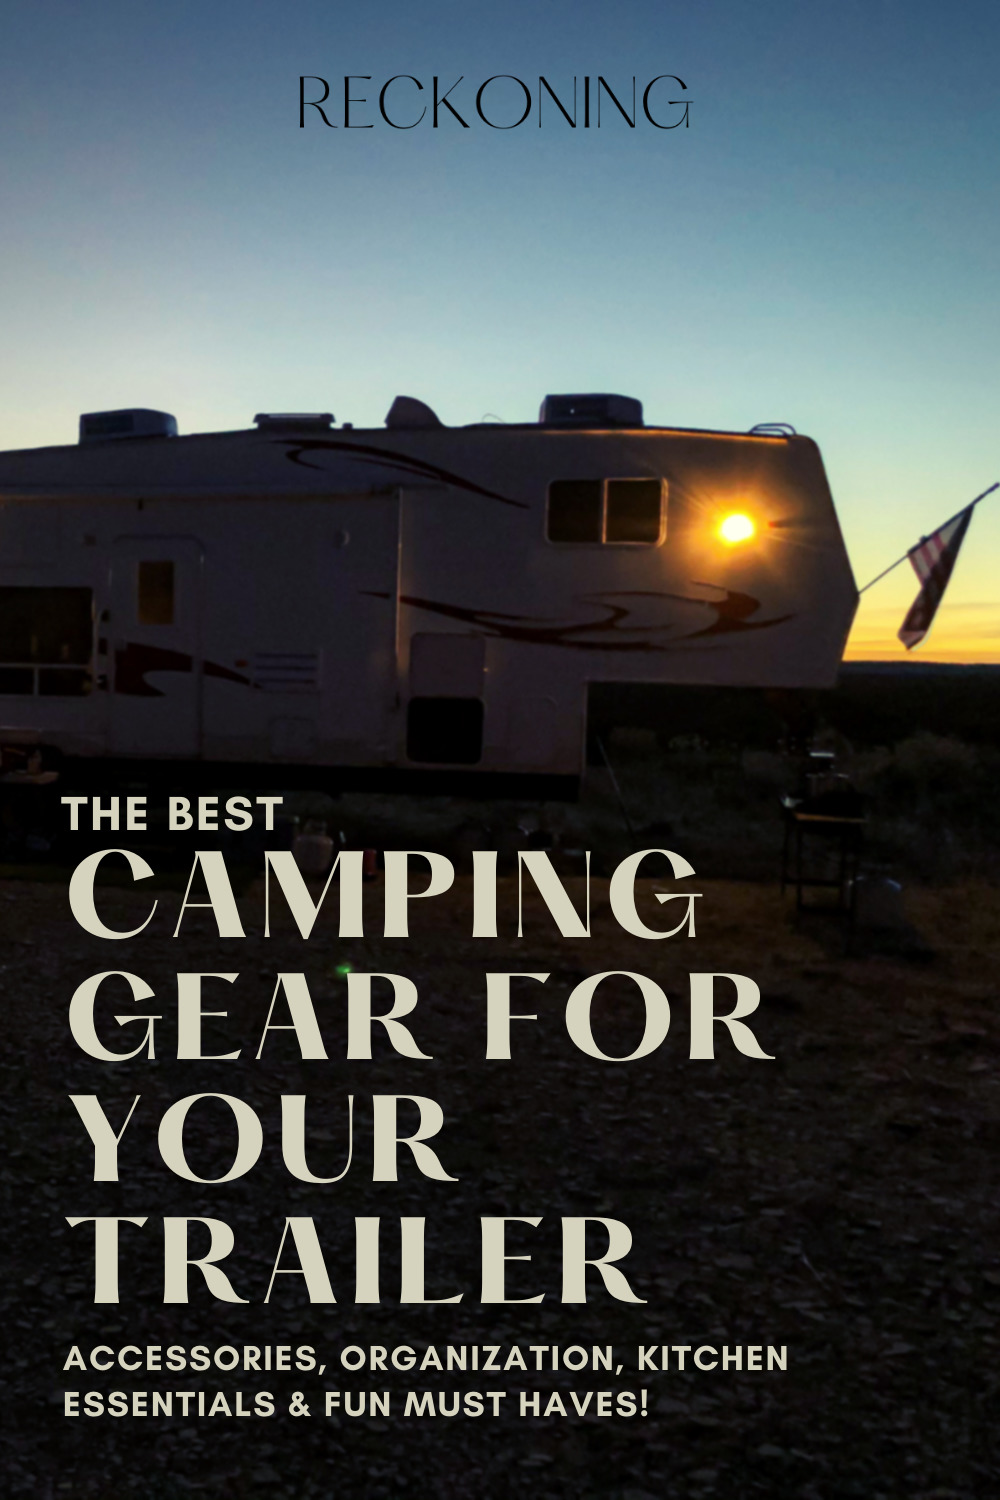 Our Top RV Must Have Accessories for RV Living 